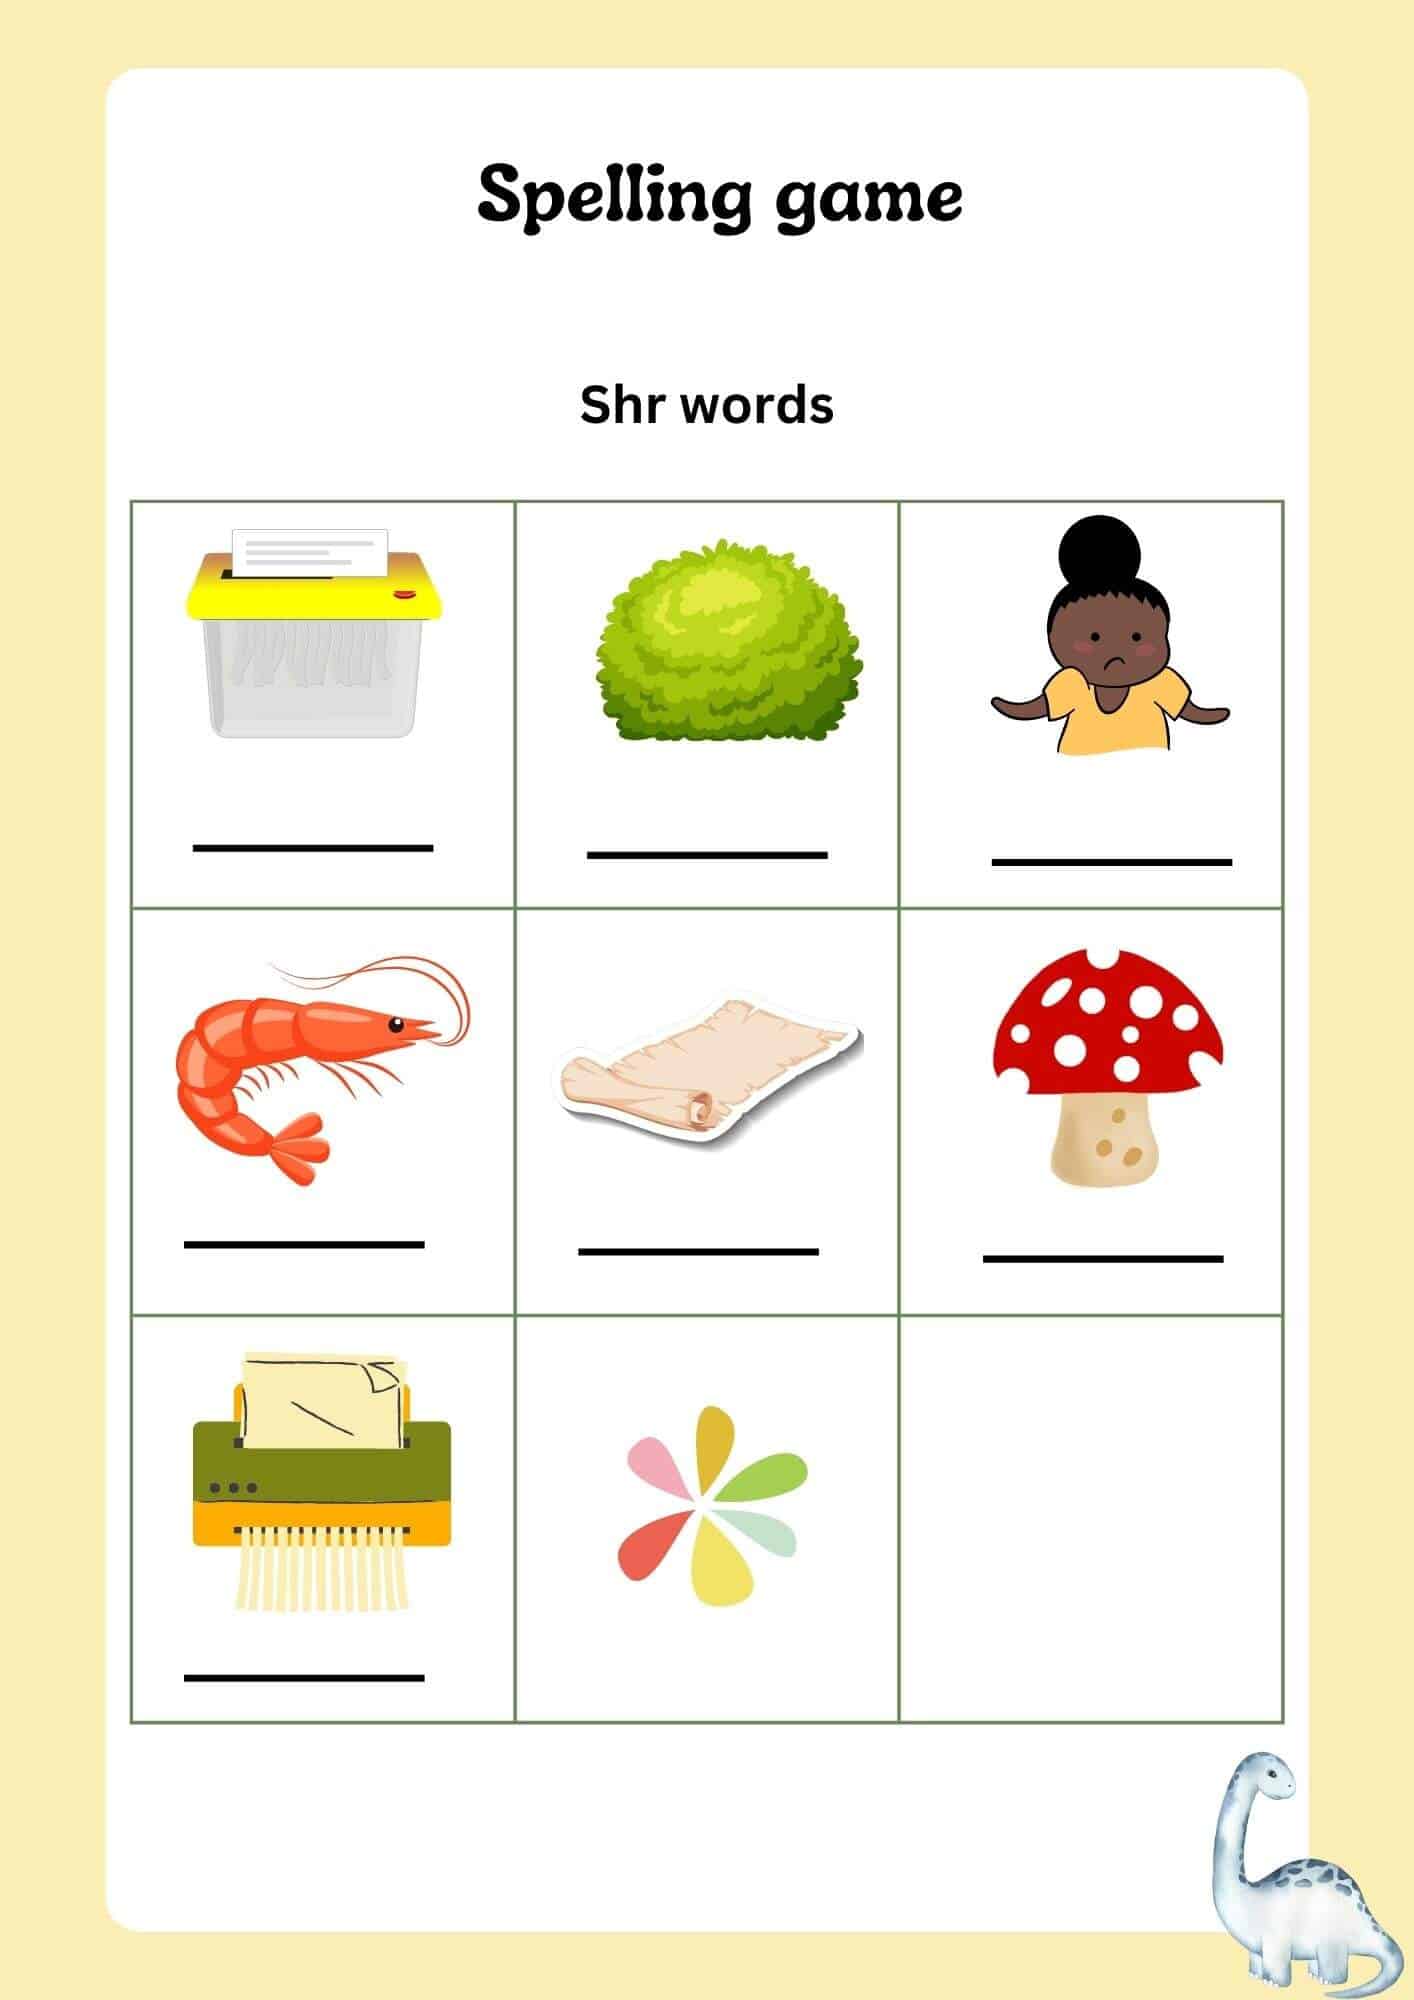 using spelling to know Shr Words Examples